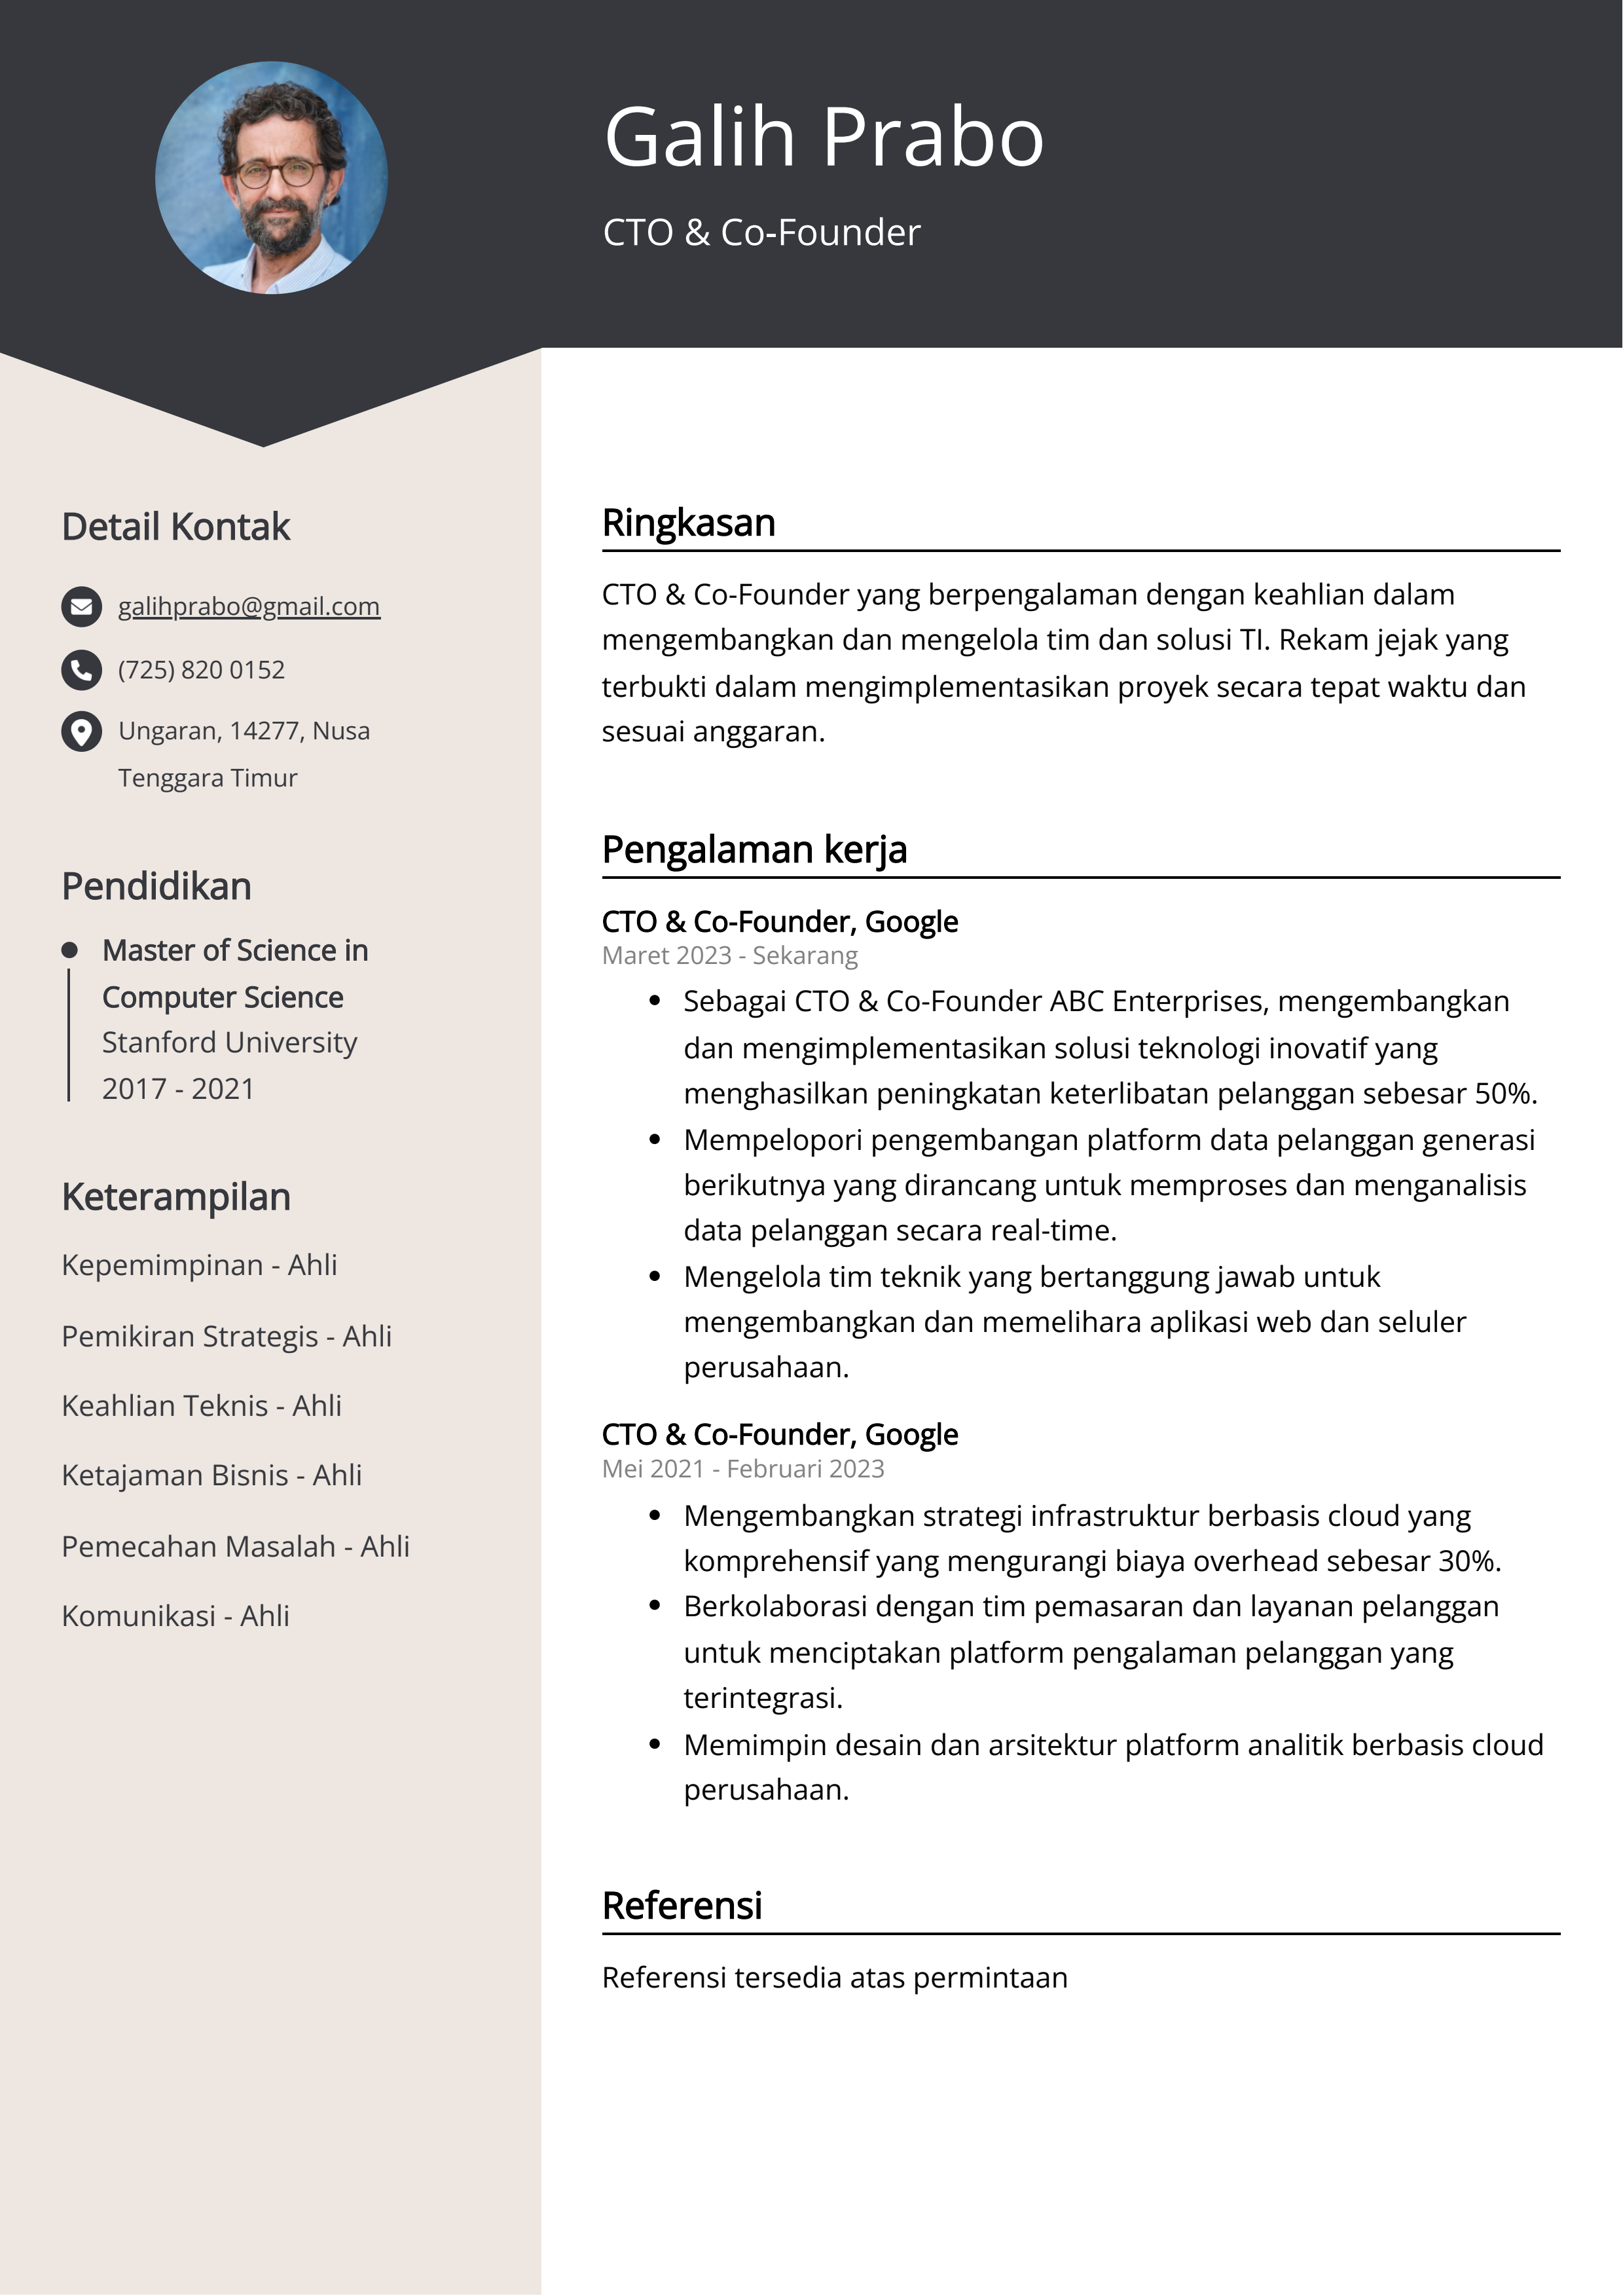 Contoh Resume CTO & Co-Founder